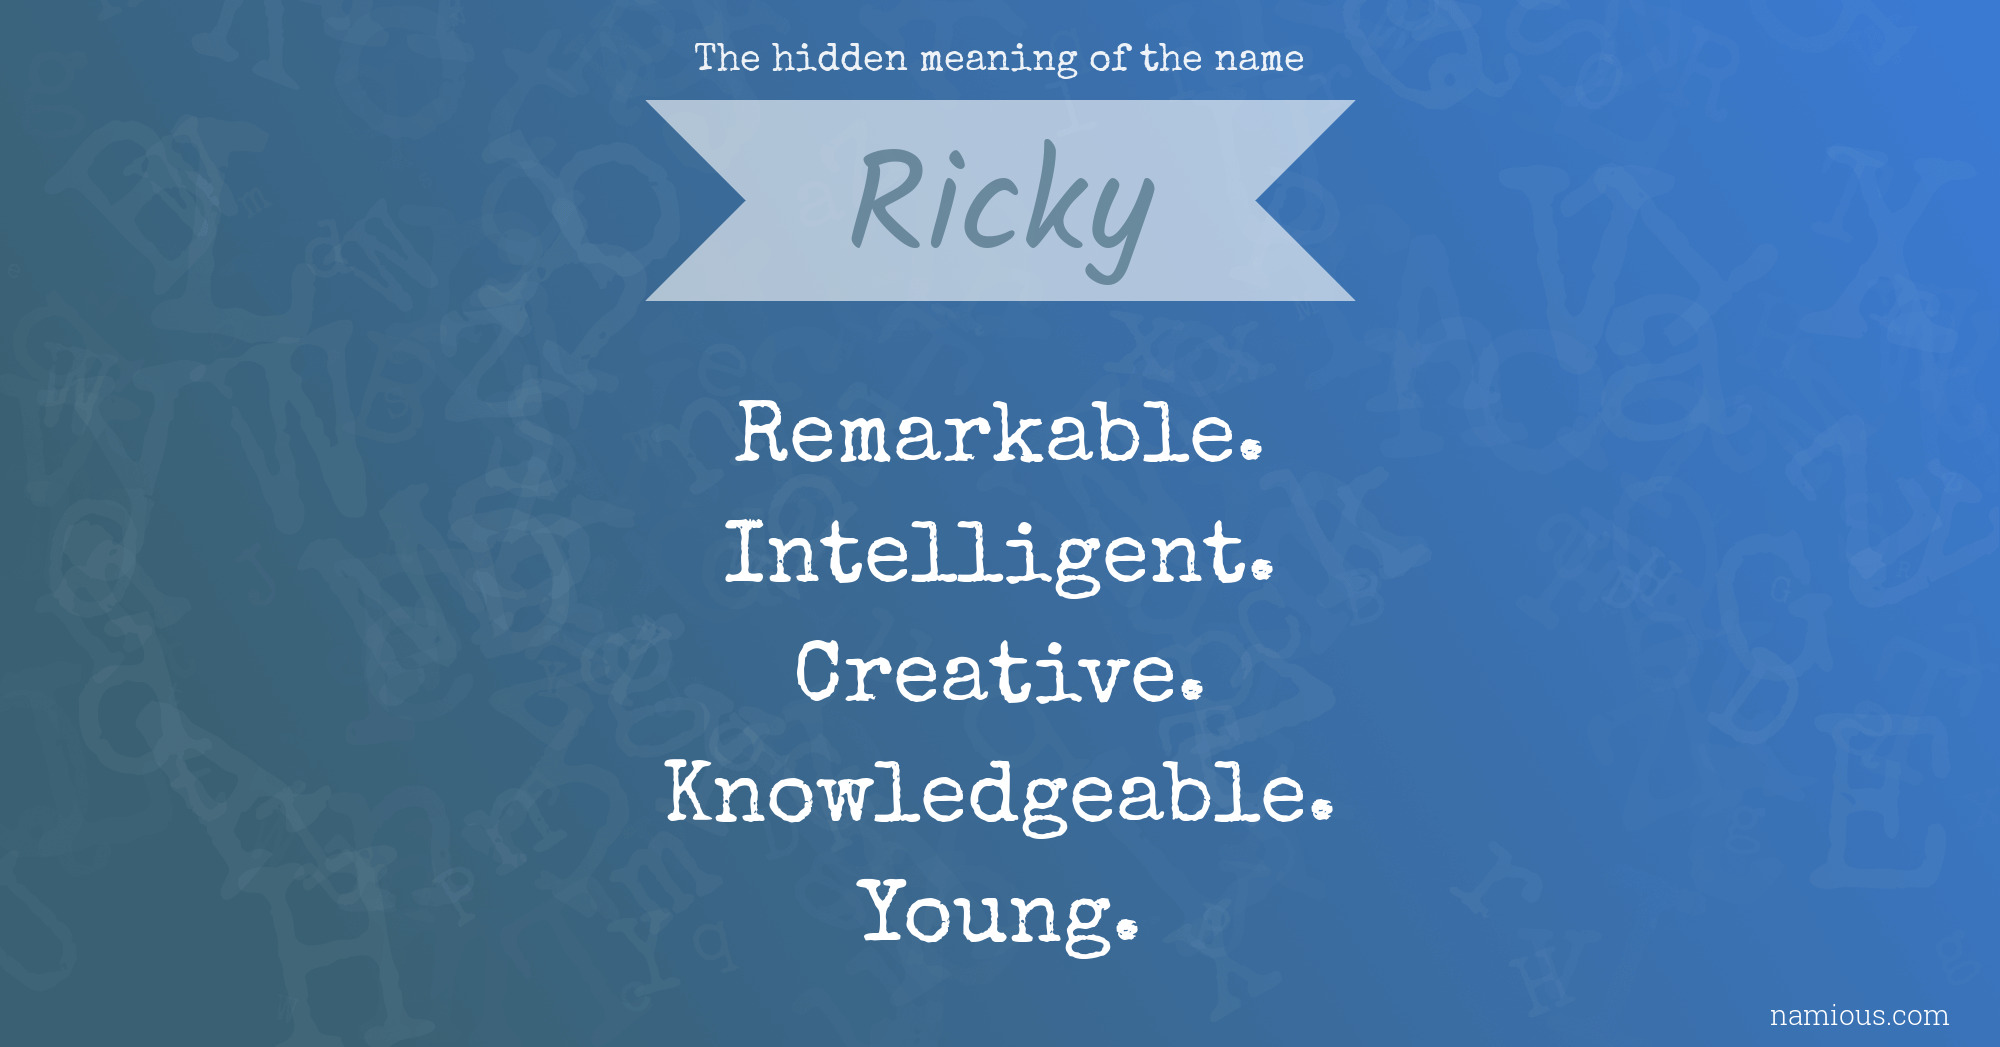 The hidden meaning of the name Ricky